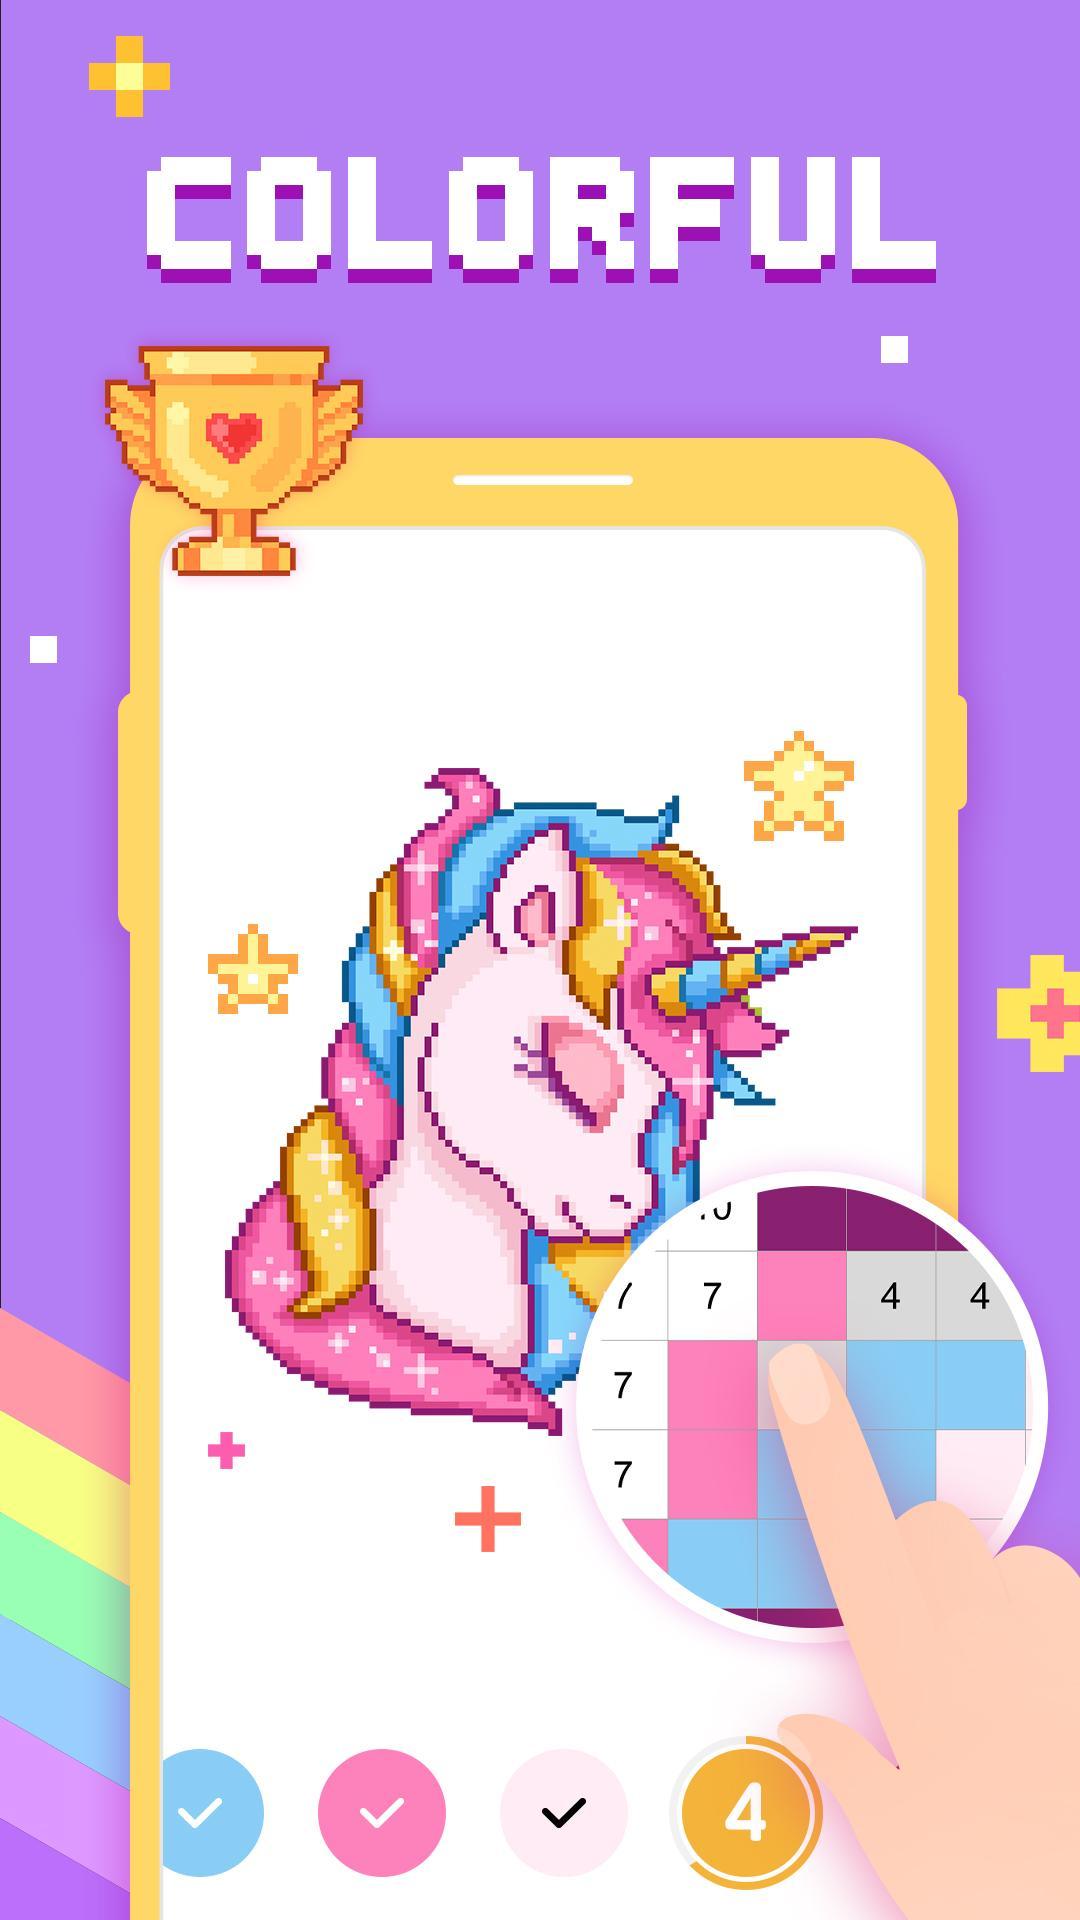 Paint by Number - Pixel Art, Free Coloring Book 3.22.1 Screenshot 1